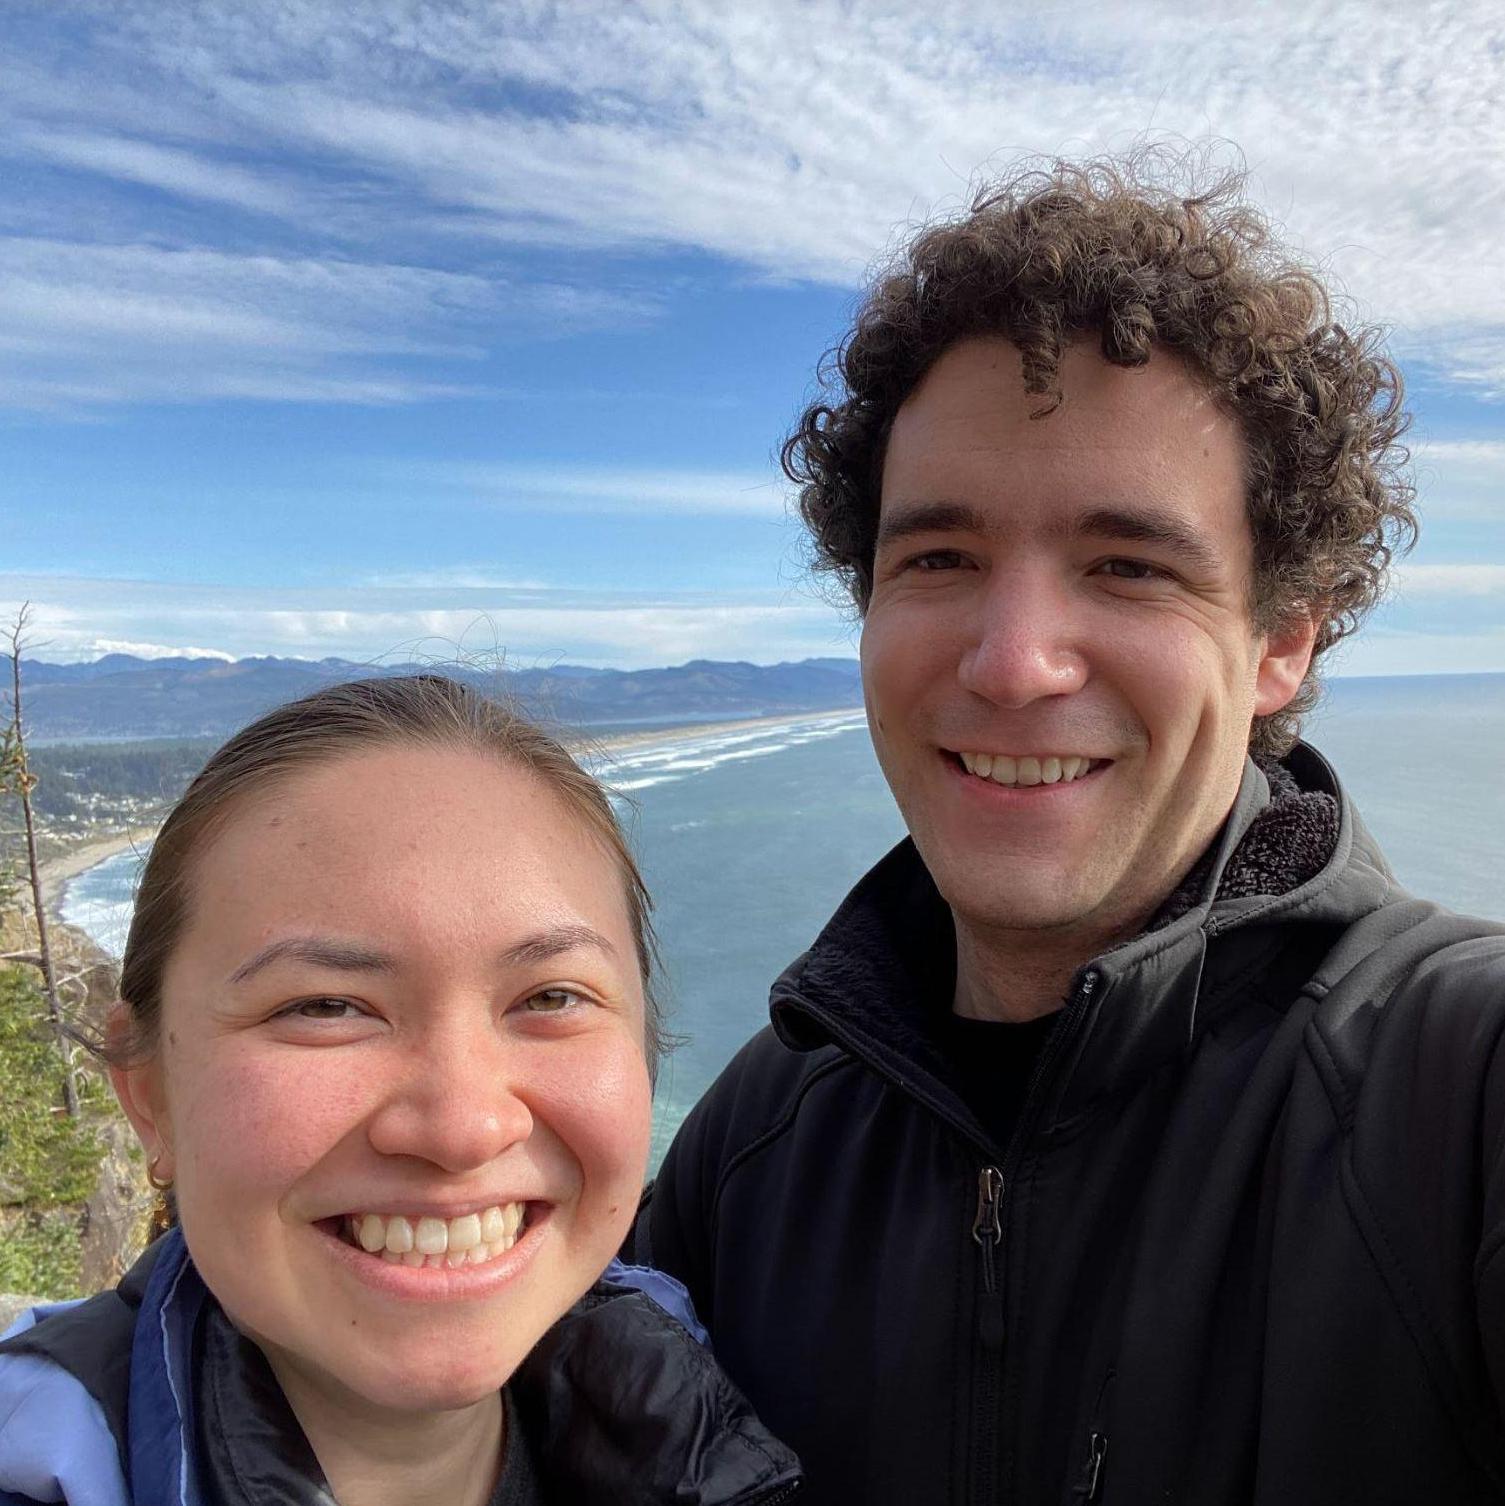 Our first trip together, Seaside, OR - April 2021